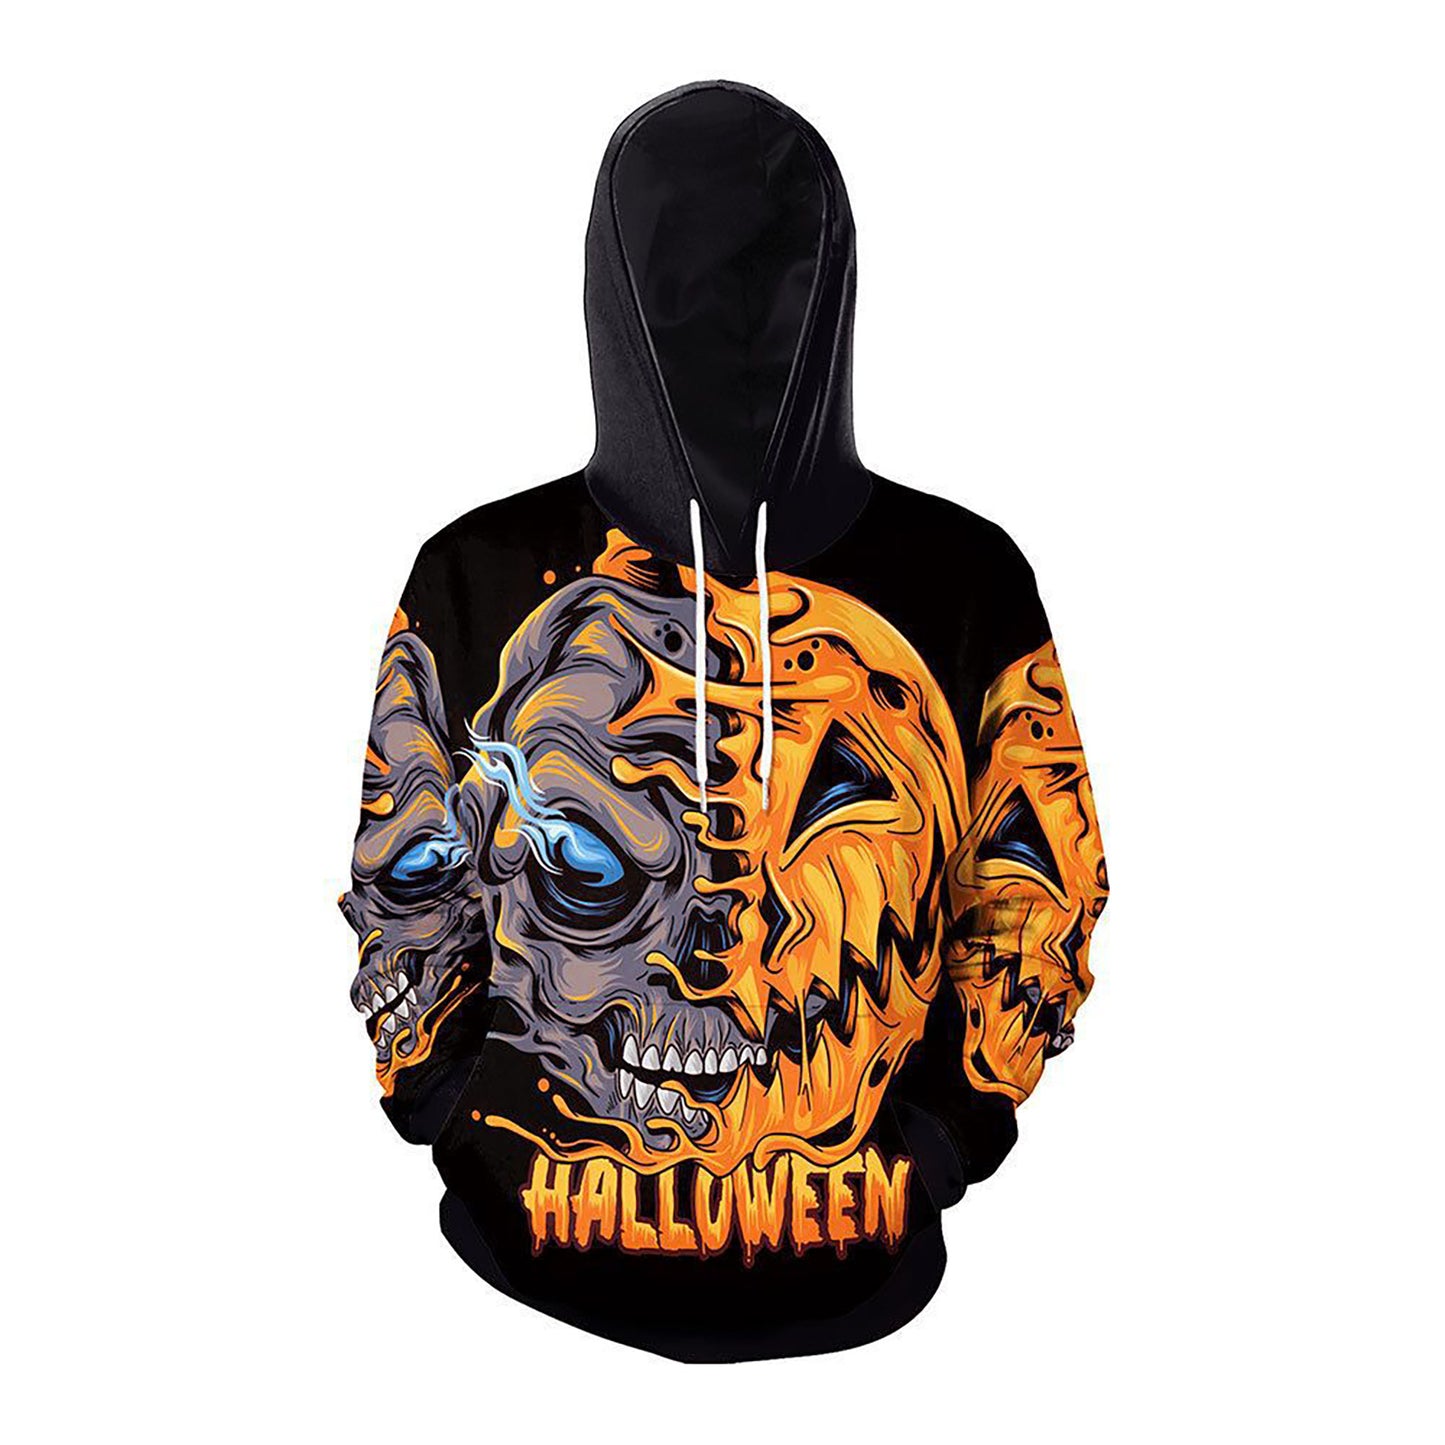 Happy Halloween Drawstring Hoodies for Winter-The same as picture-S-Free Shipping at meselling99